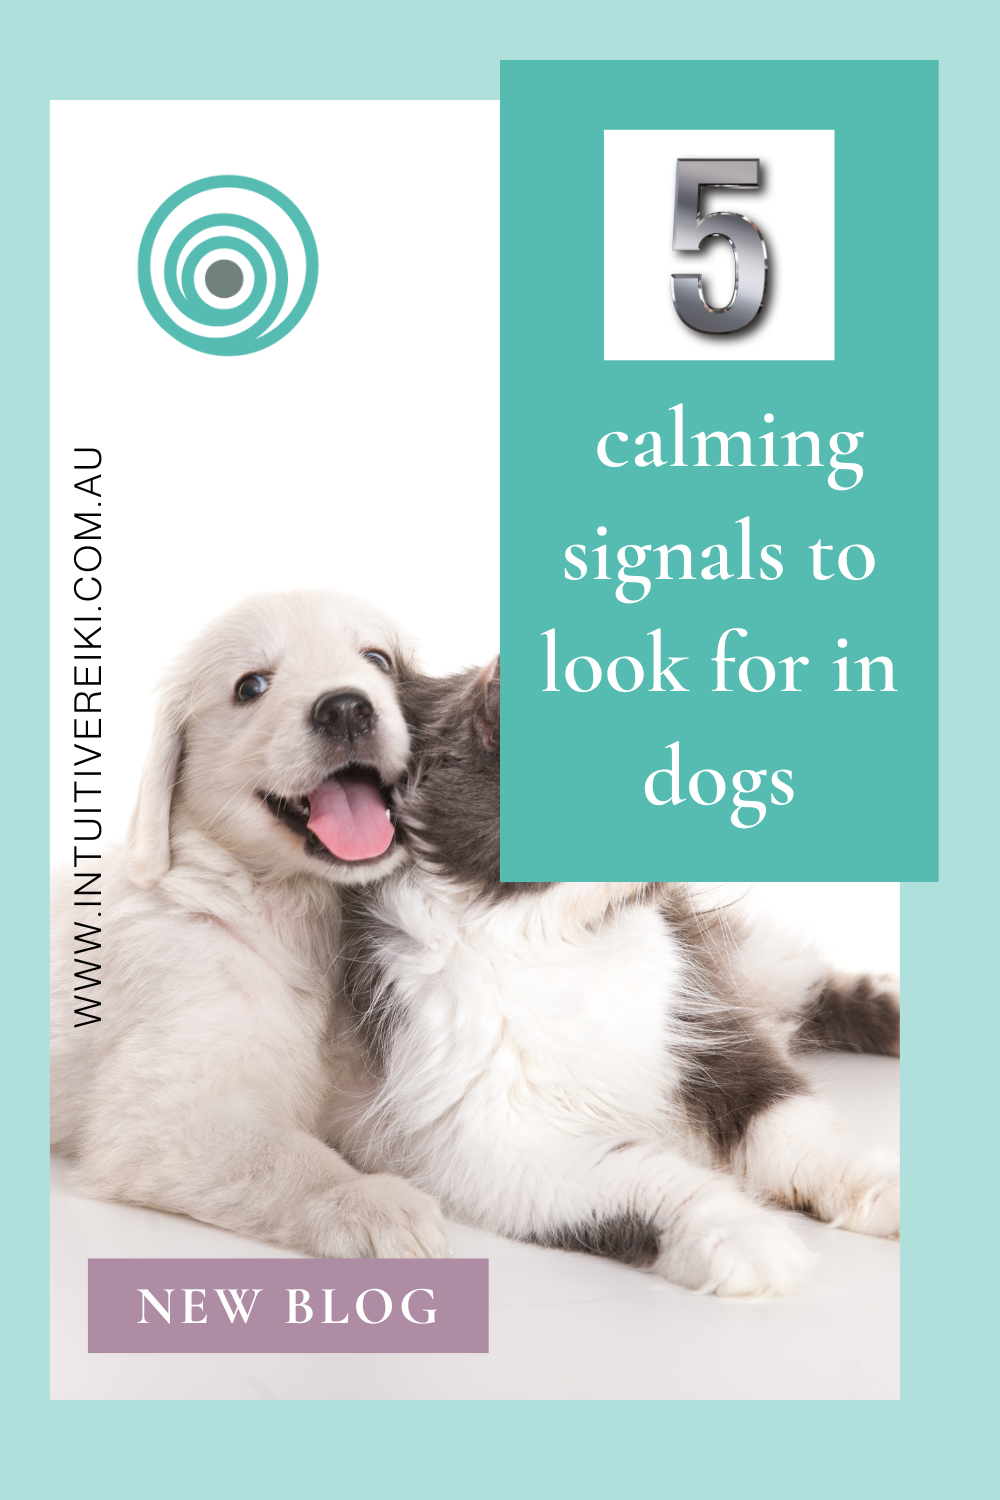 There are many Powerful ways to communicate with our Pets more deeply- The simplest but highly beneficial ways are through Behaviour and Calming Signals and Telepathic Communication.